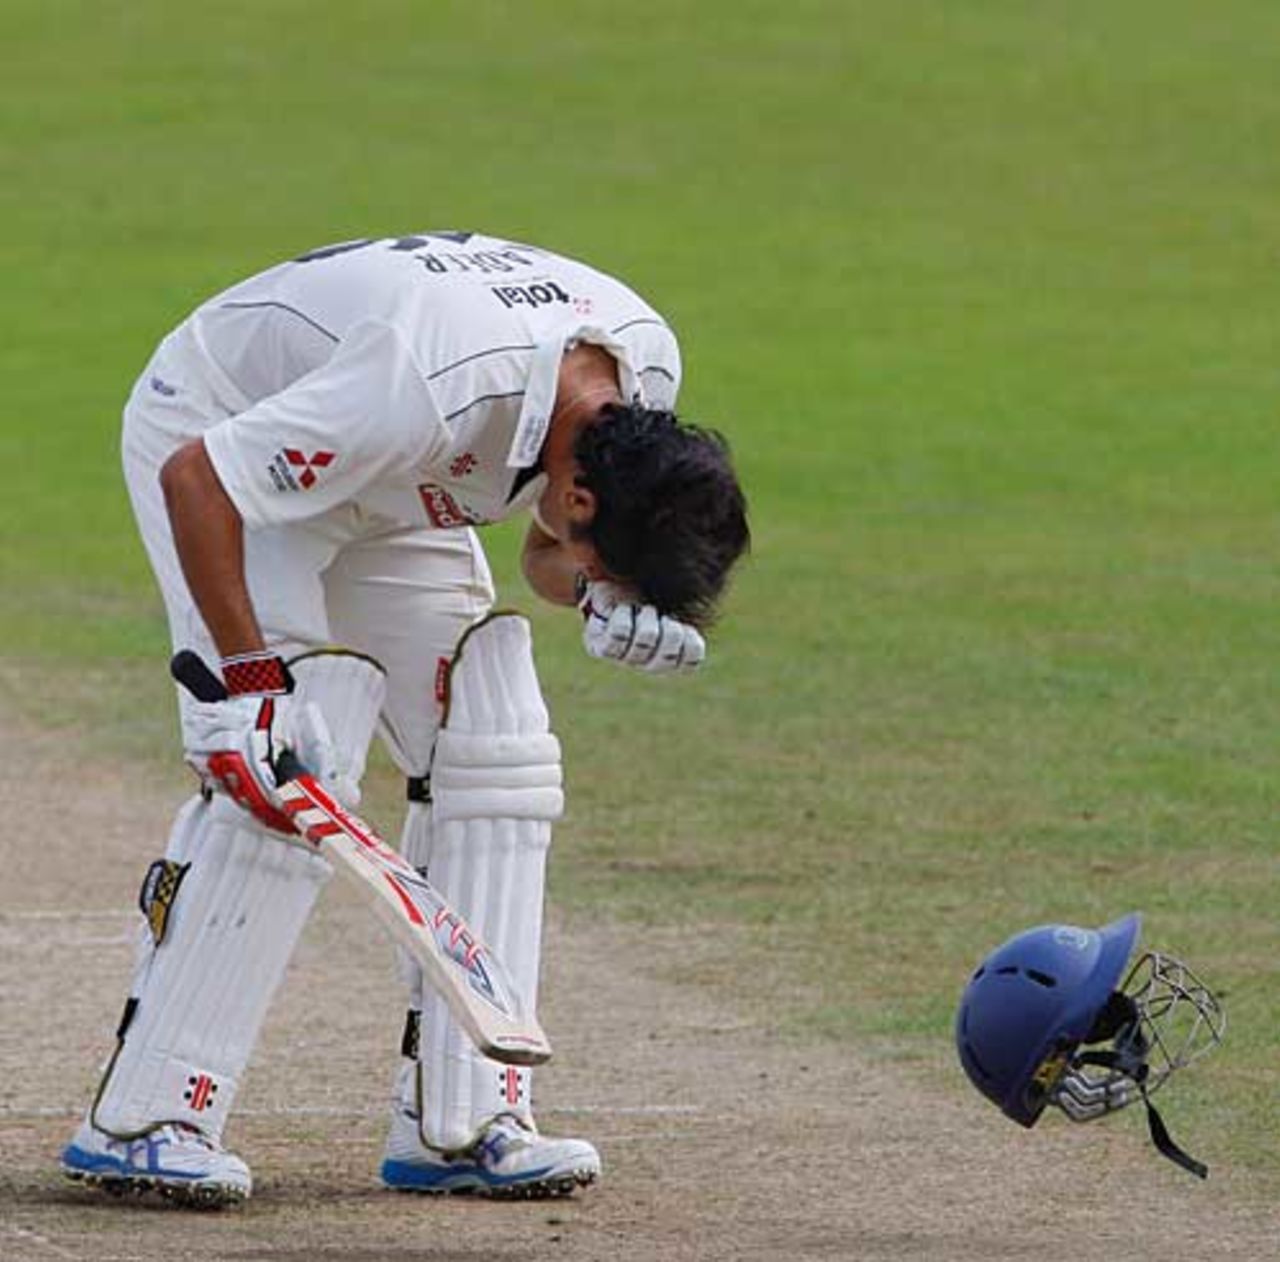 Kadeer Ali was forced to retire hurt after a blow from Johan van der Wath, Gloucestershire v Northamptonshire, County Championship, Cheltenham, July 20, 2009